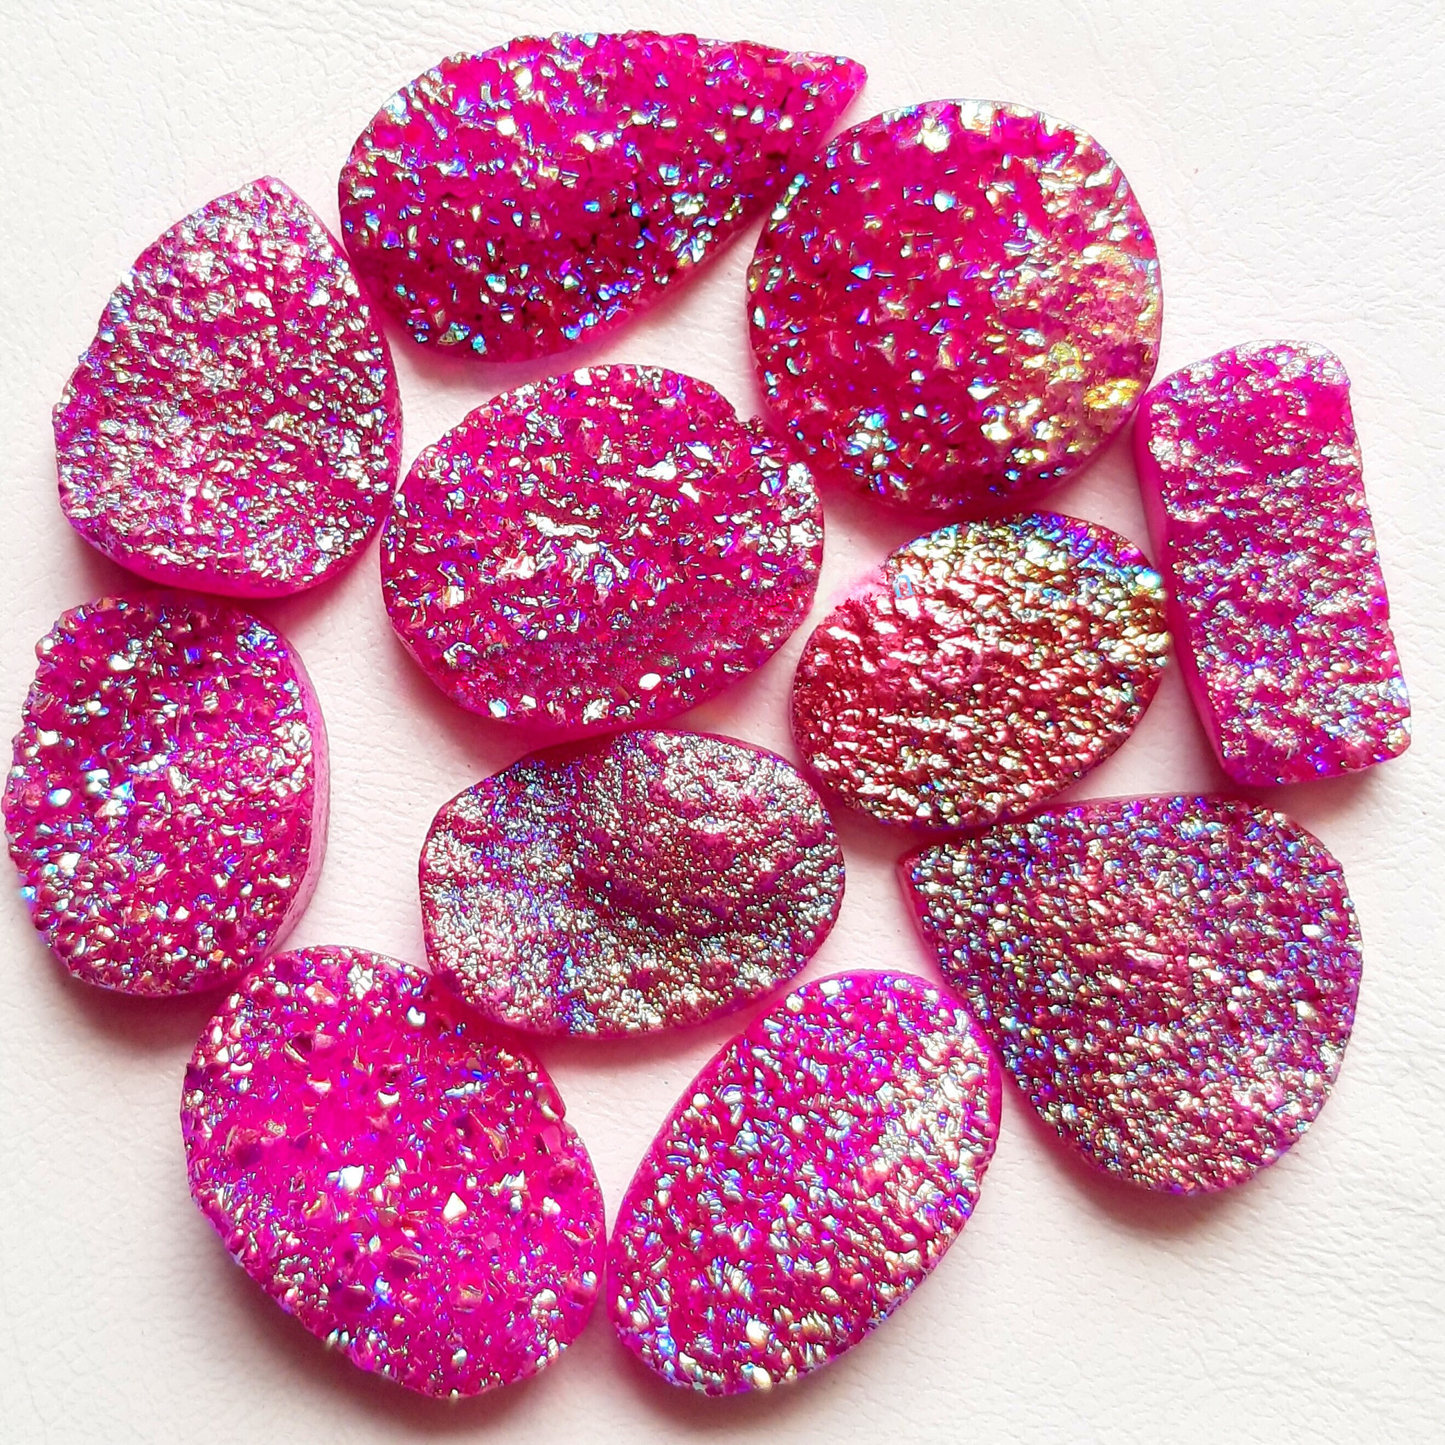 Pink Color Titanium Coated Druzy Stone Cabochon Wholesale Lot Gemstone By Pieces With Different Shapes And Sizes Used For Jewelry Making (Natural-Coated)